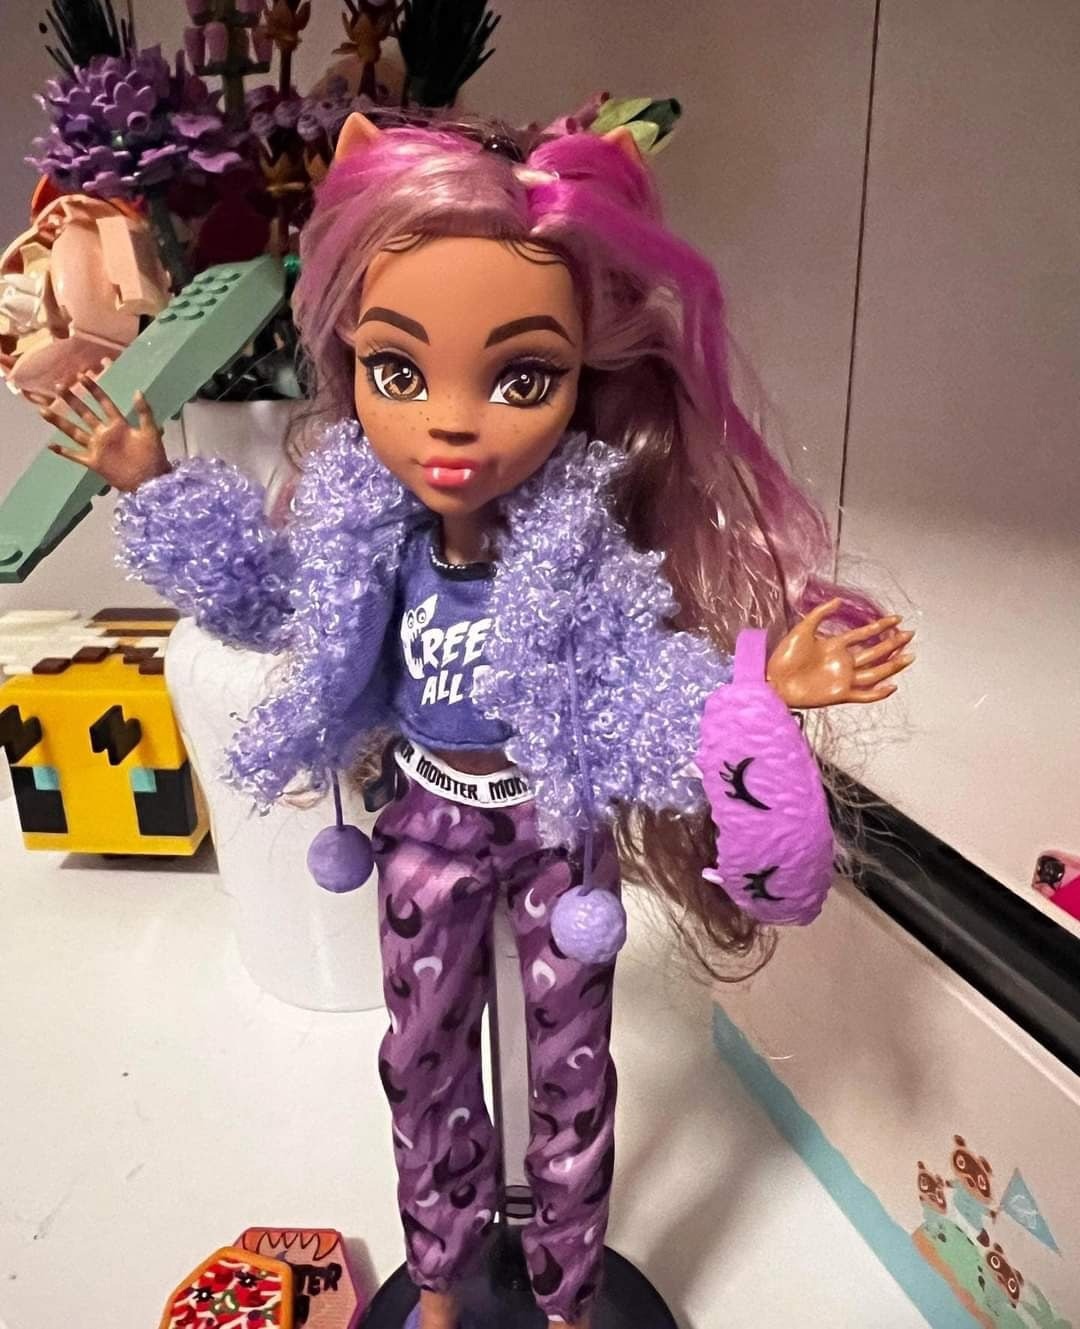 New Monster High 2022 dolls and playsets - G3 collection - YouLoveIt.com